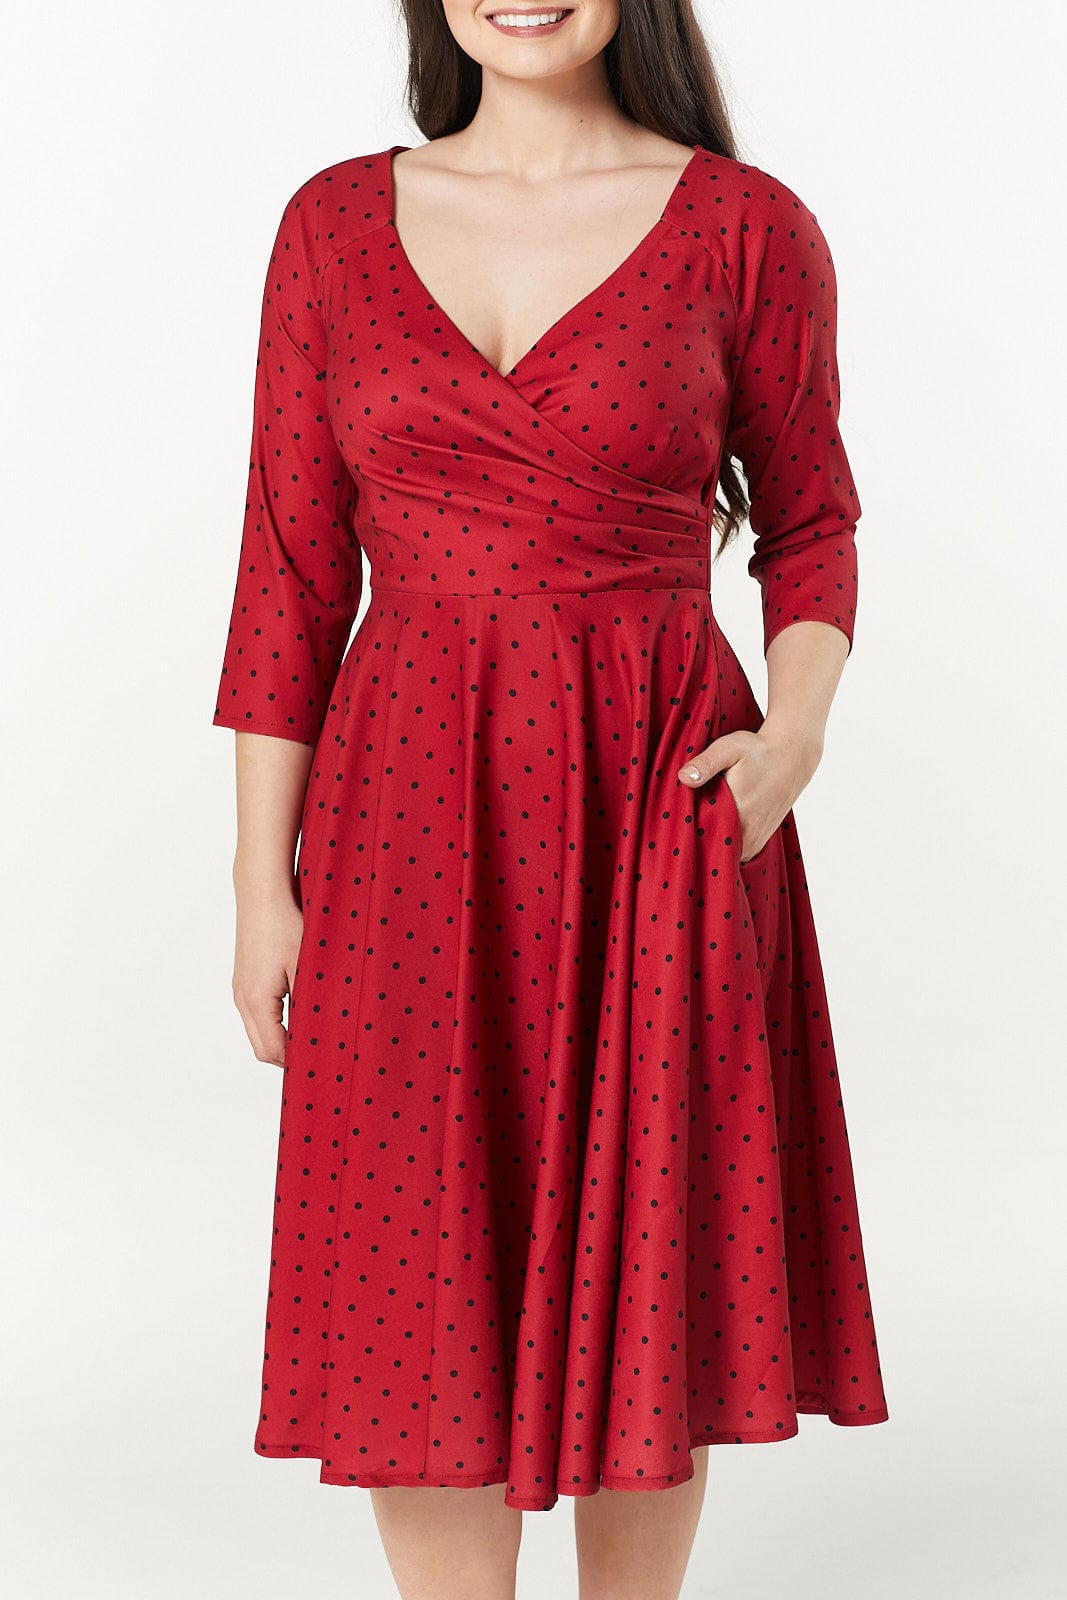 Genevieve Red and Black Polka Dot Fit and Flare Dress